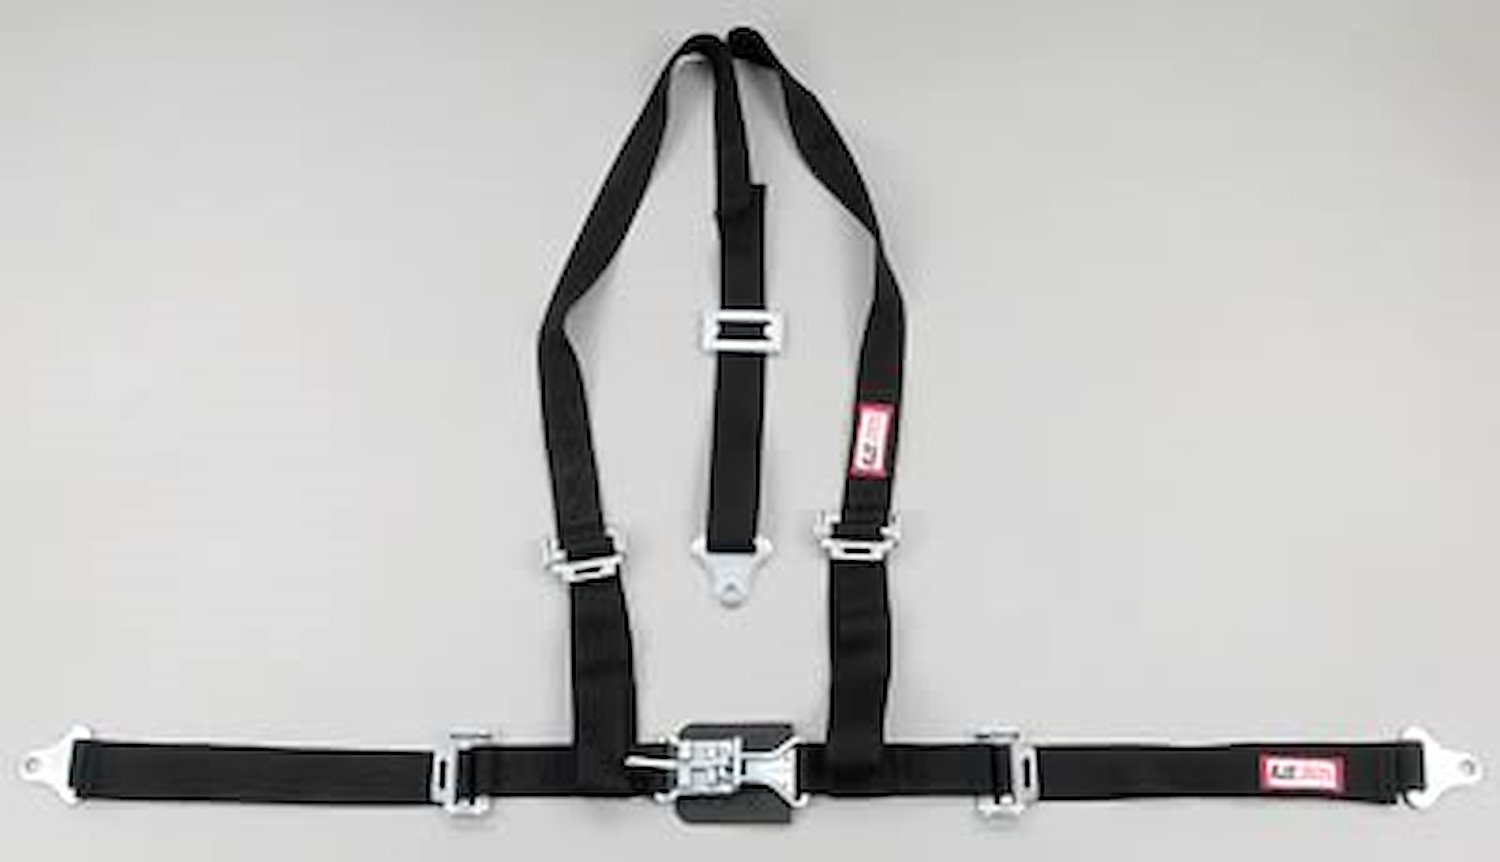 NON-SFI L&L HARNESS 2 PULL UP Lap Belt SNAP SEWN IN 2 S.H. Individual ROLL BAR Mount w/STERNUM STRAP WRAP/SNAP KHAKI